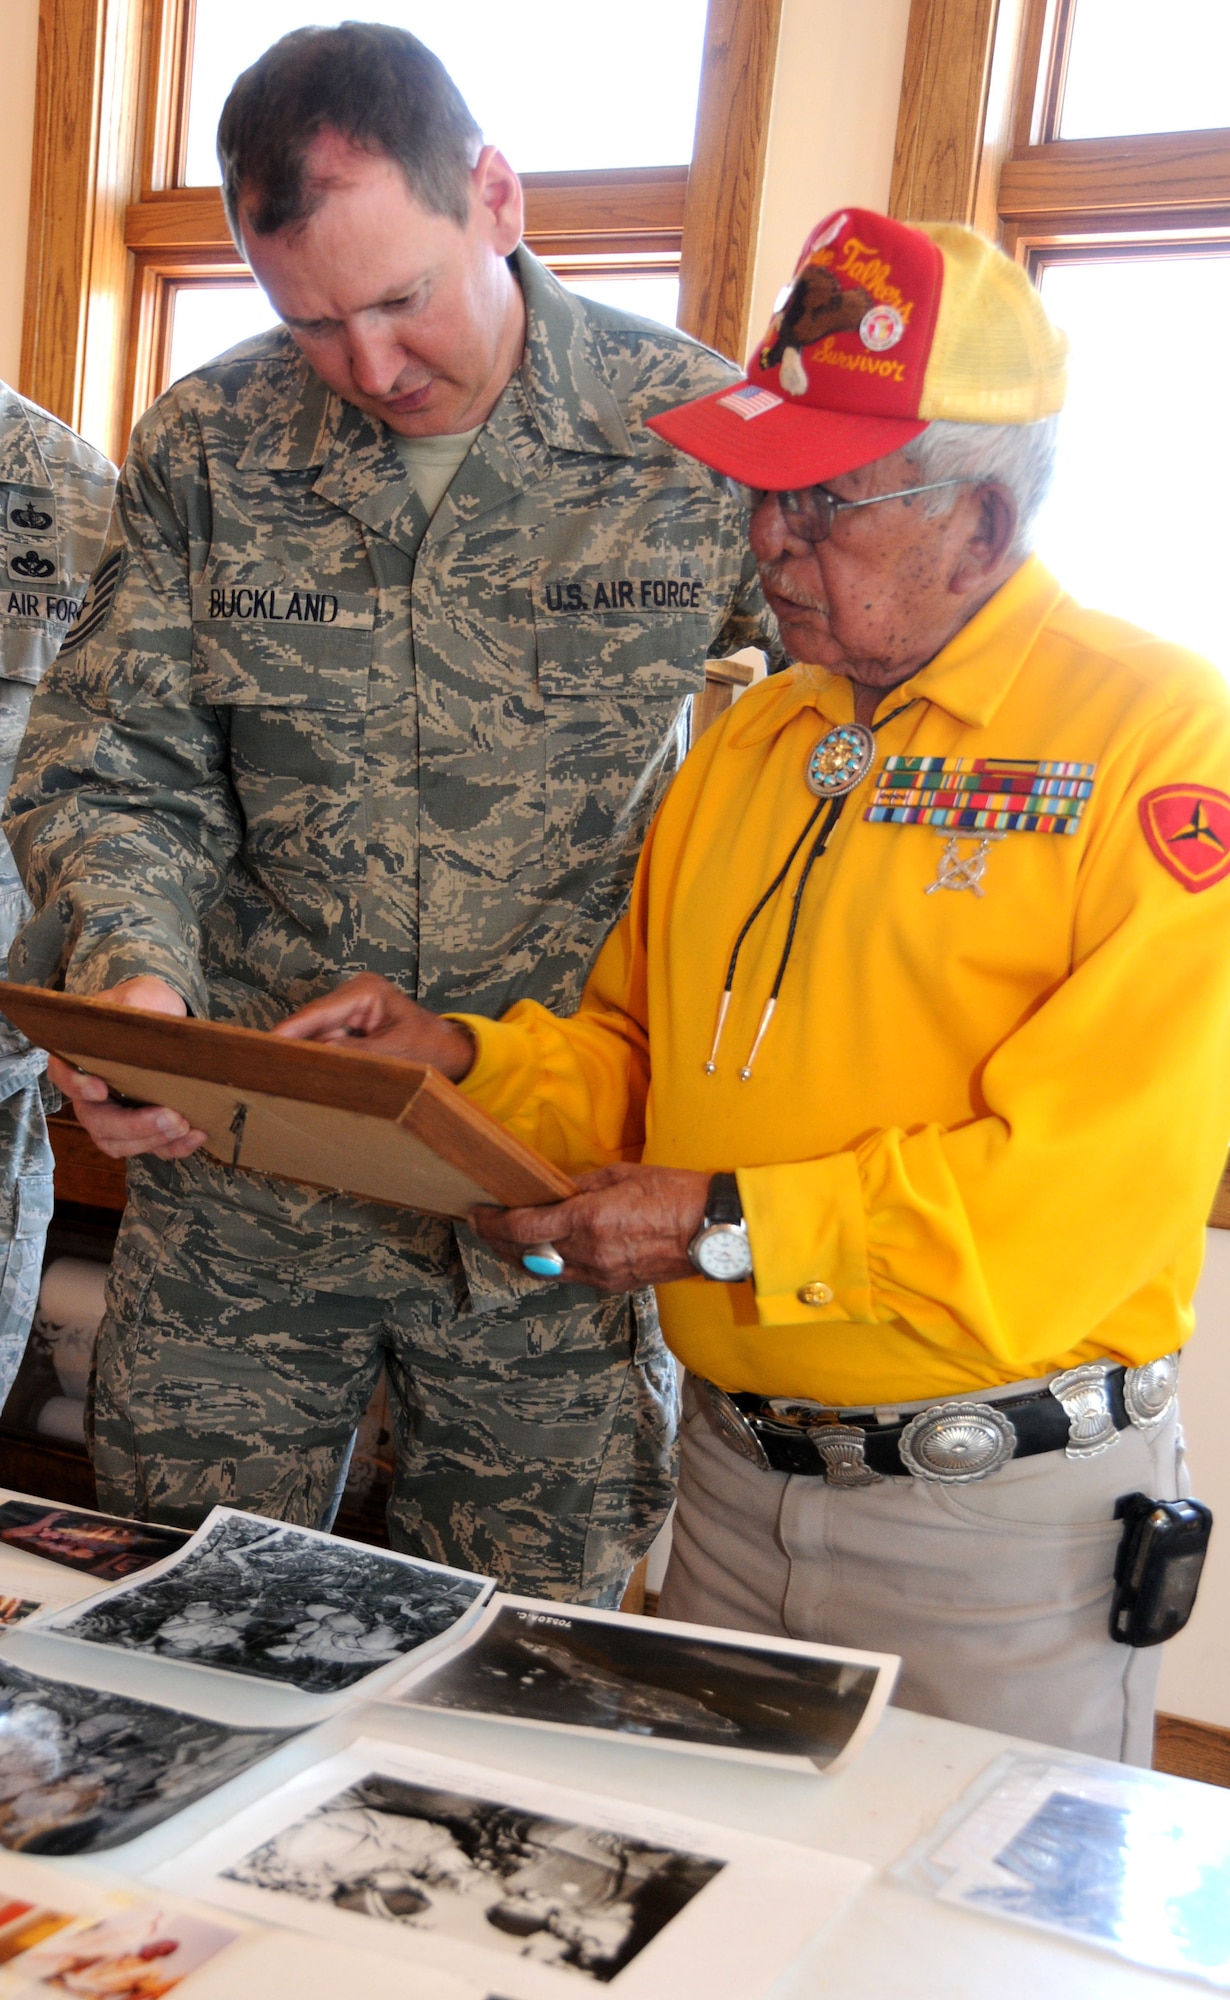 Bill Toledo, an original Navajo "Code-Talker" from World War II, discusses an old photo of himself with Tech Sgt. Gareth Buckland, Broadcaster, 113th Wing Public Affairs, District of Columbia Air National Guard, before Toledo's speech to members of the 113th Wing in Gallup, N.M., June 2, 2011.  The 113th Wing members are in Gallup and Window Rock, Ariz., as part of the Innovative Readiness Training, a civil-military affairs program linking military units with civilian communities for humanitarian projects.  (U.S. Air Force Photo by Tech Sgt. Craig Clapper)   